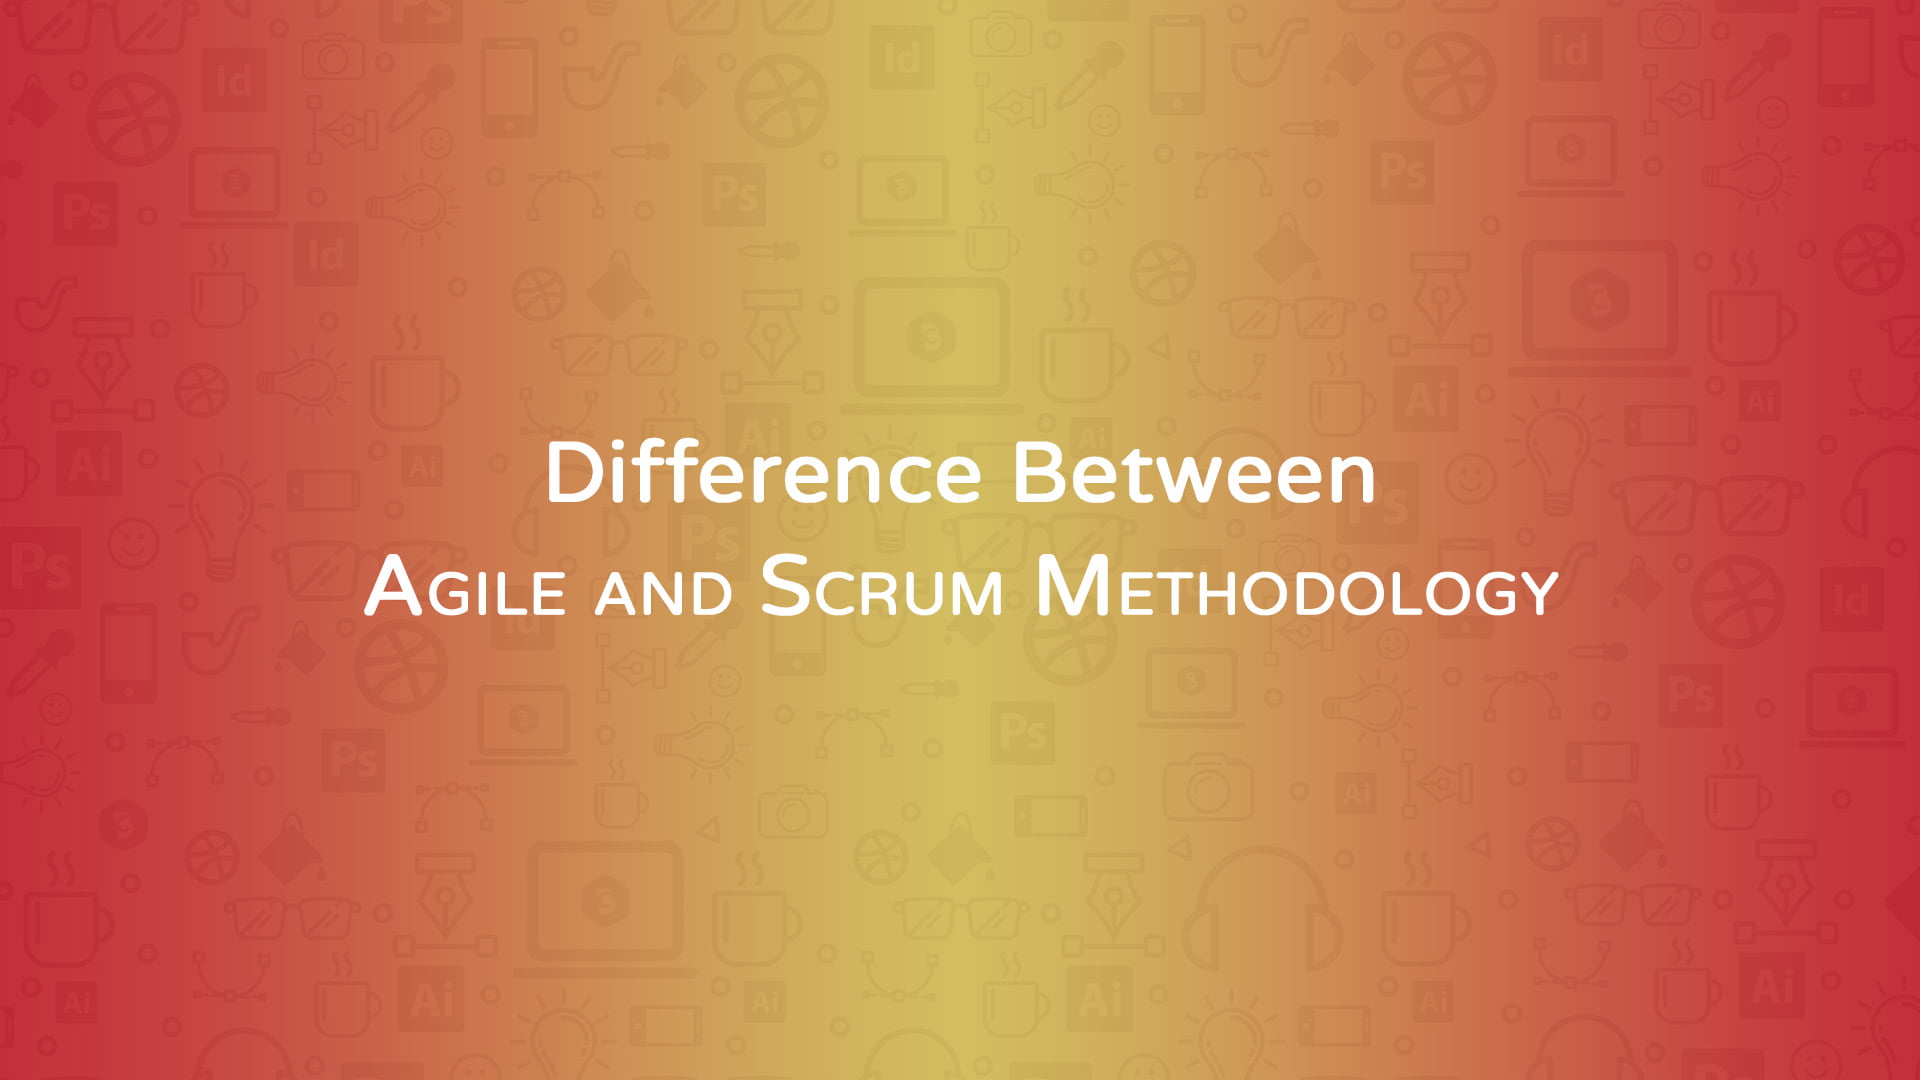 Difference Between Agile and Scrum Methodology